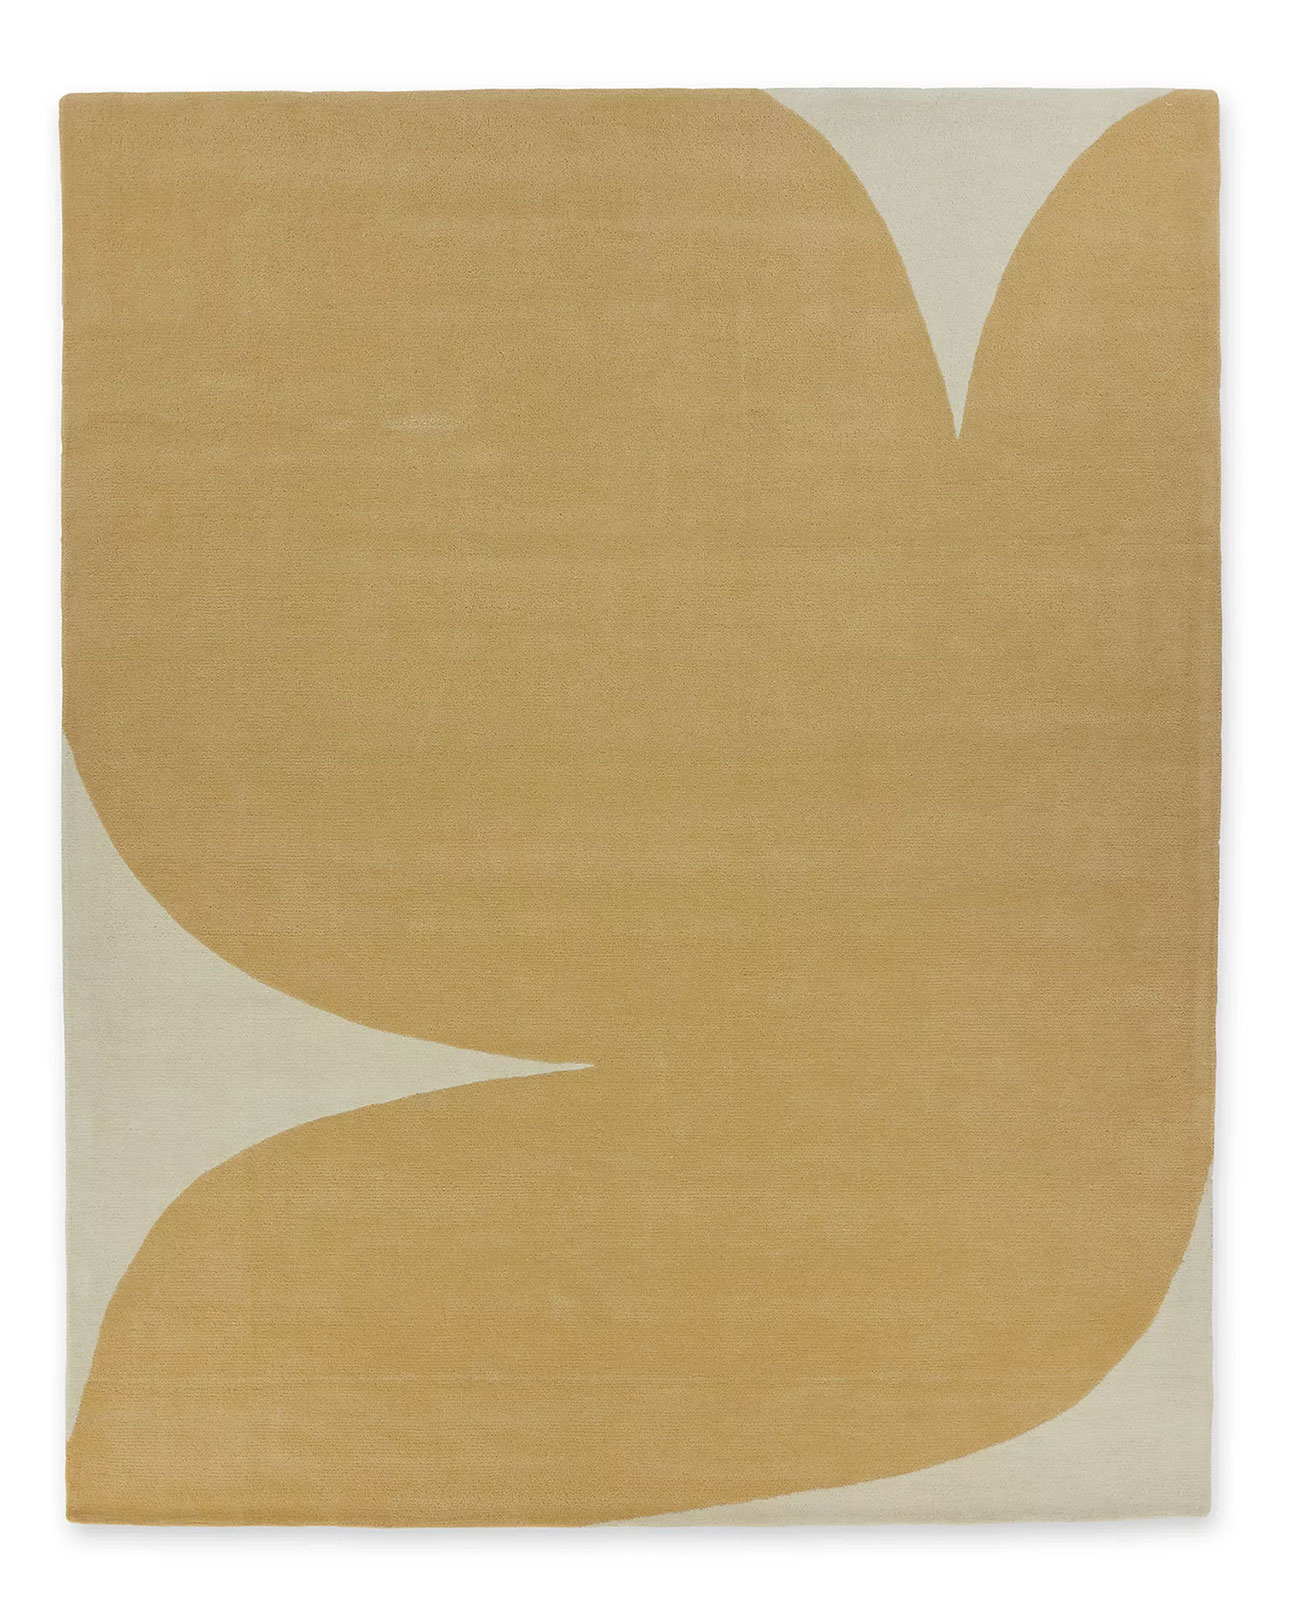 A beige colored, hand tufted area rug called Dove Peace, by Angela Adams